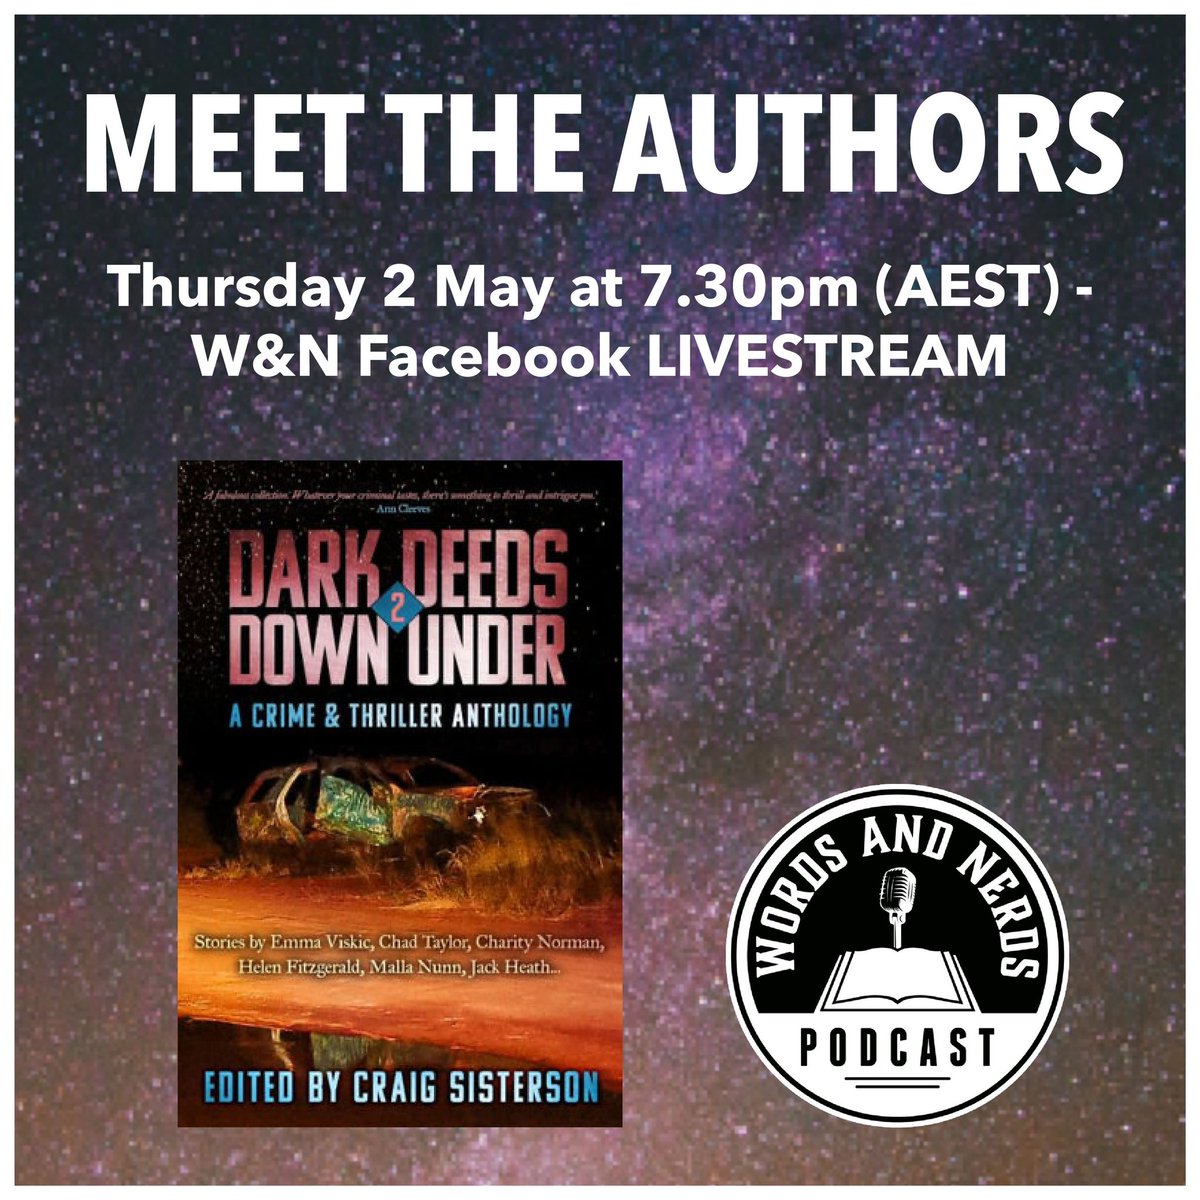 Meet the authors and editor Craig Sisterson in this epic line up of creators for Dark Deeds Down Under 2, a crime anthology you don’t want to miss! Join the conversation! There will be a chance for you to ask questions. Thursday 2 May at 7.30pm 🔥